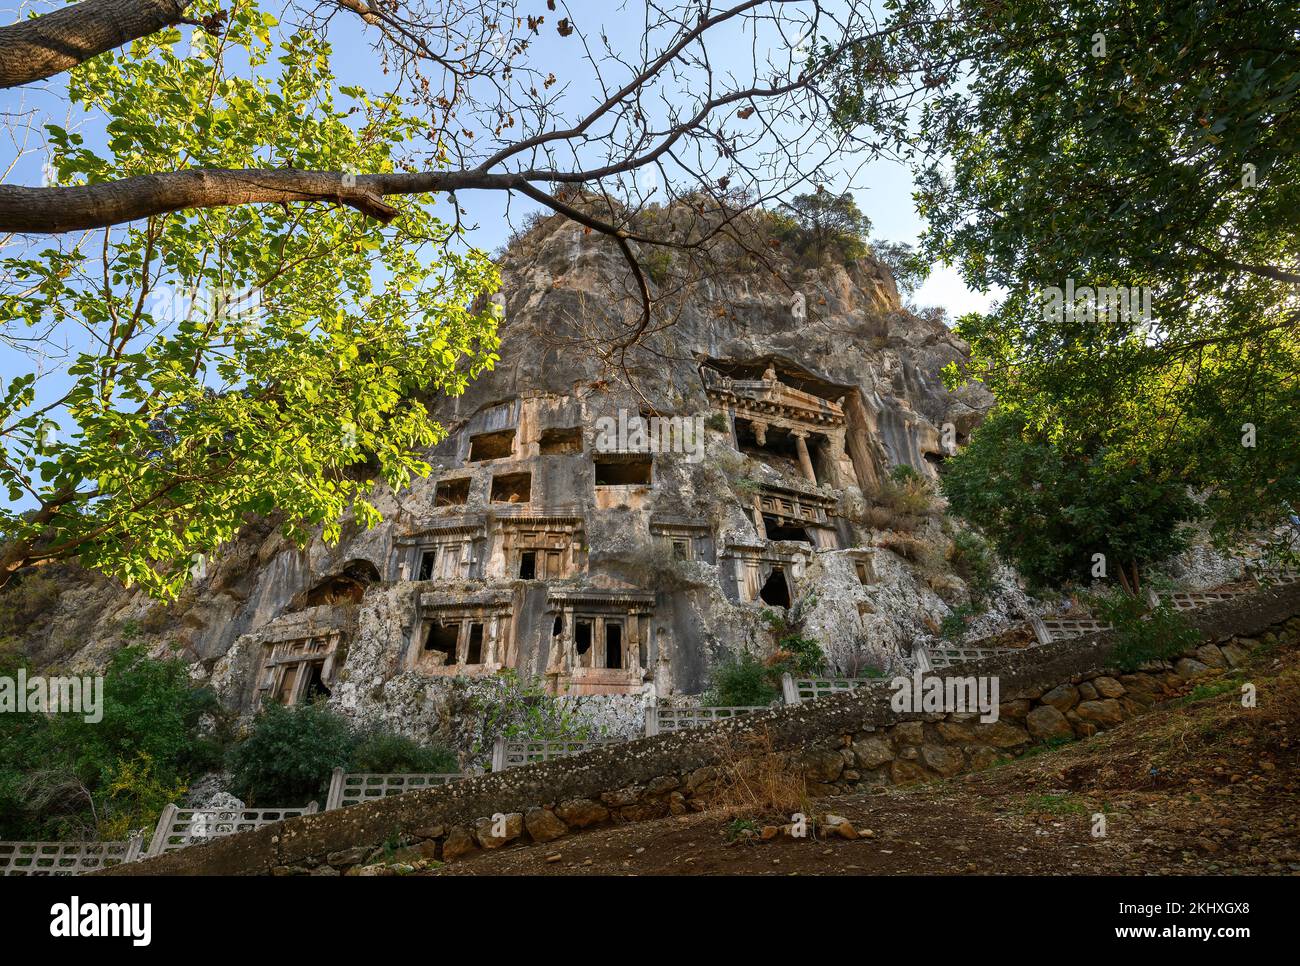 Amyntas Rock Tombs at ancient Telmessos, in Lycia. Now in the city of Fethiye, Turkey Stock Photo